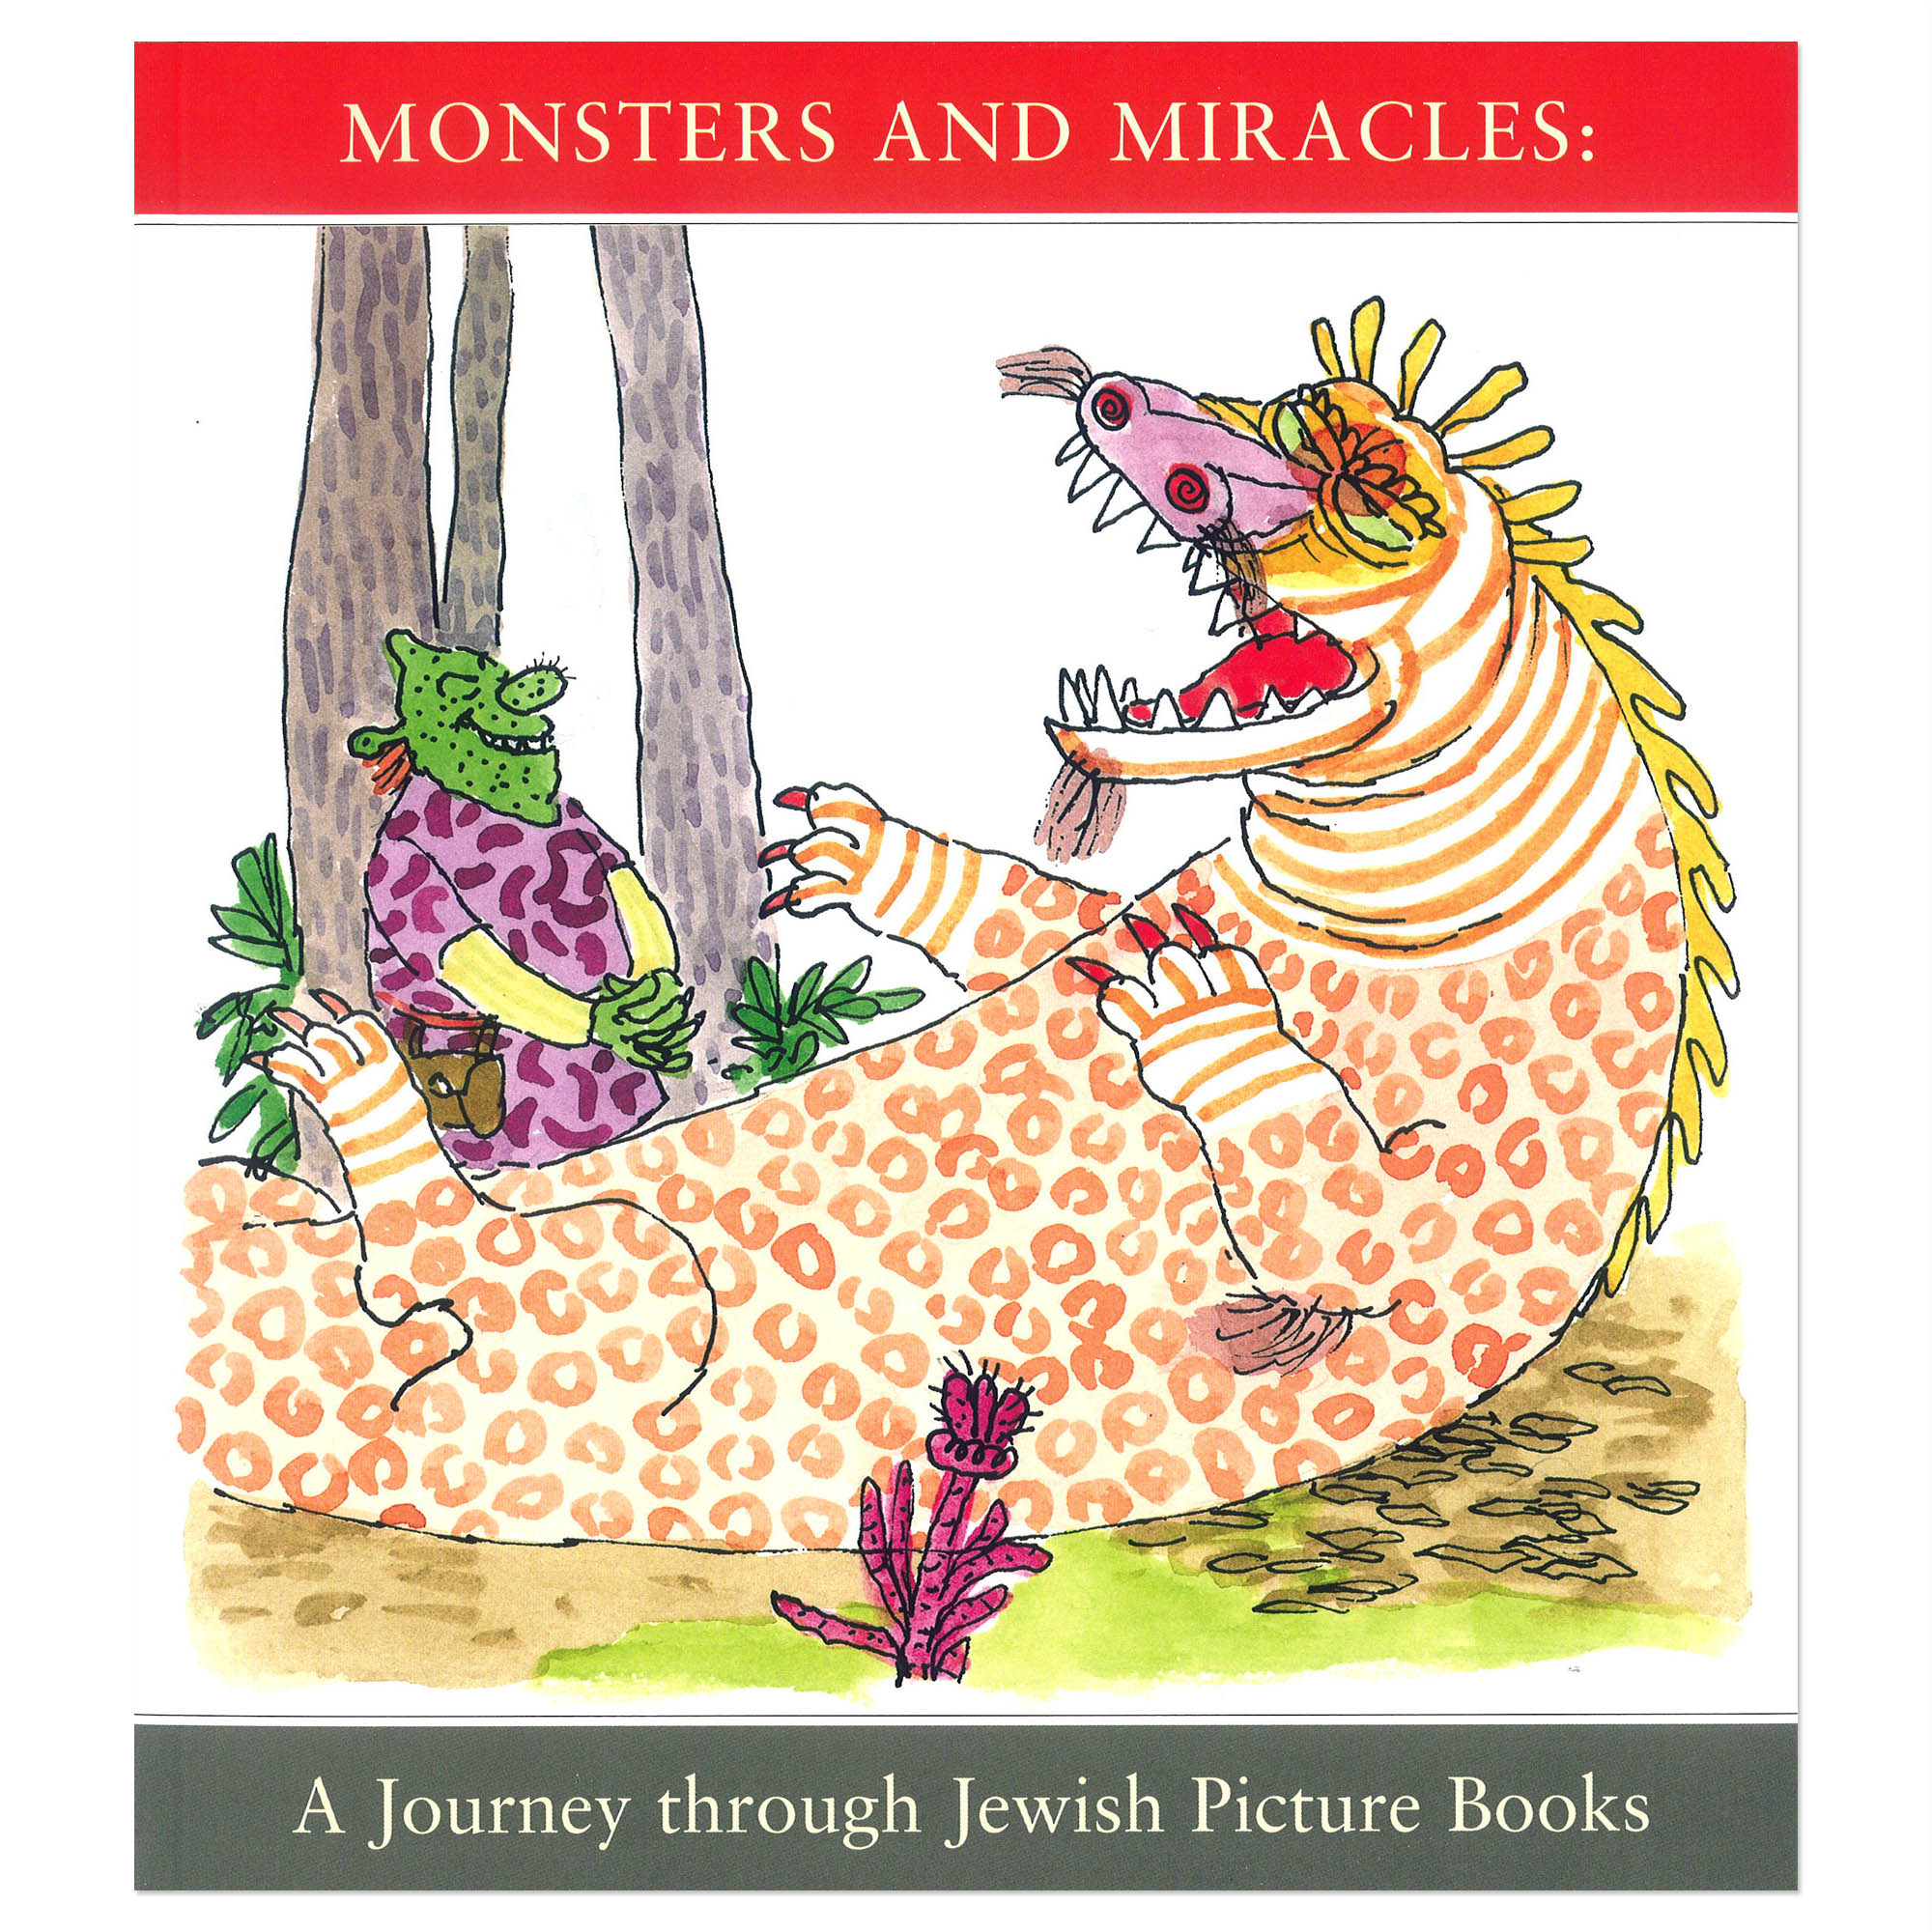 Monsters and Miracles: A Journey Through Jewish Picture Books